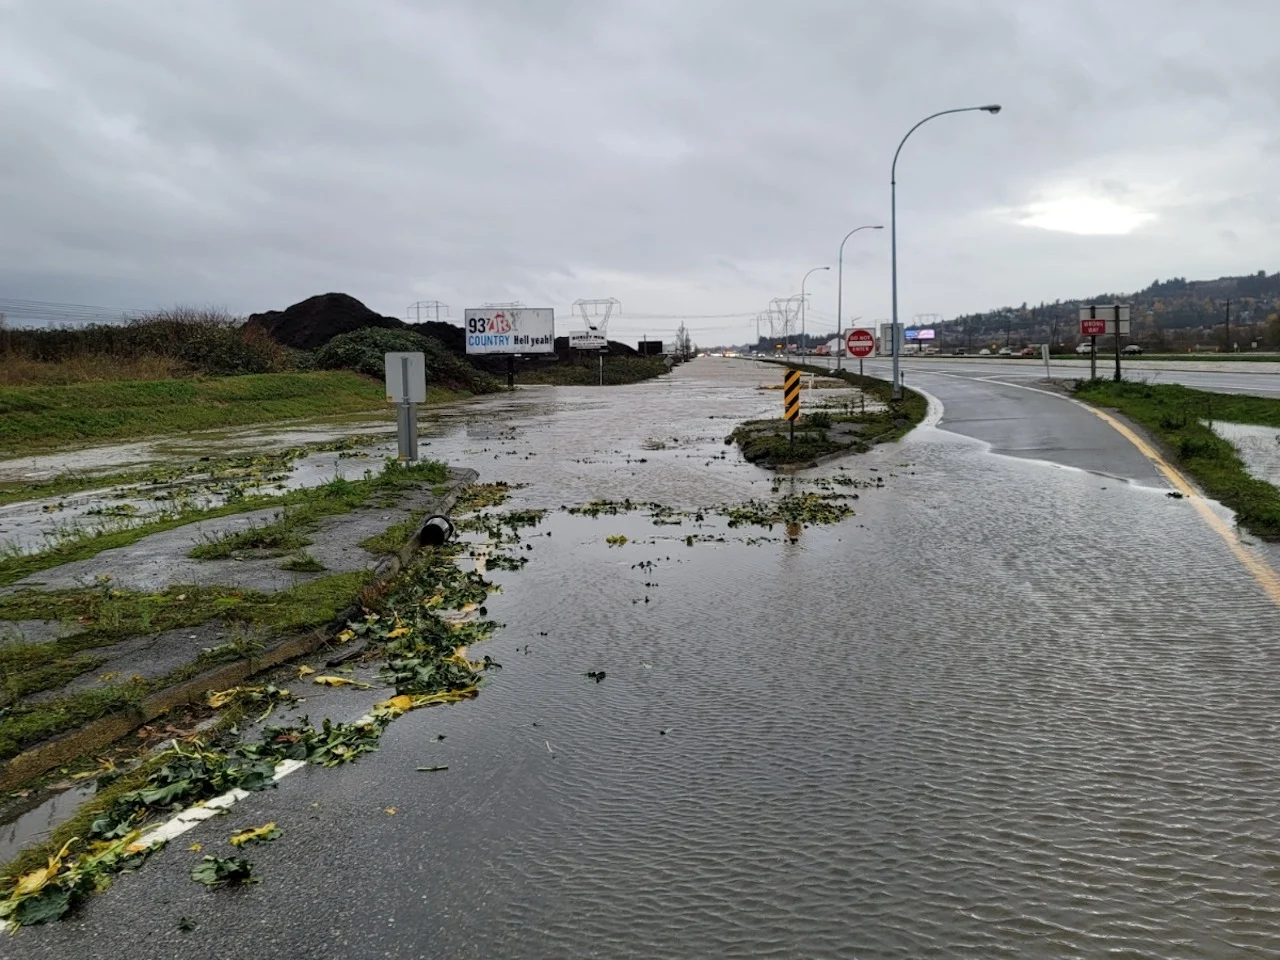 Record-cold plaguing B.C., flood risk set to surge